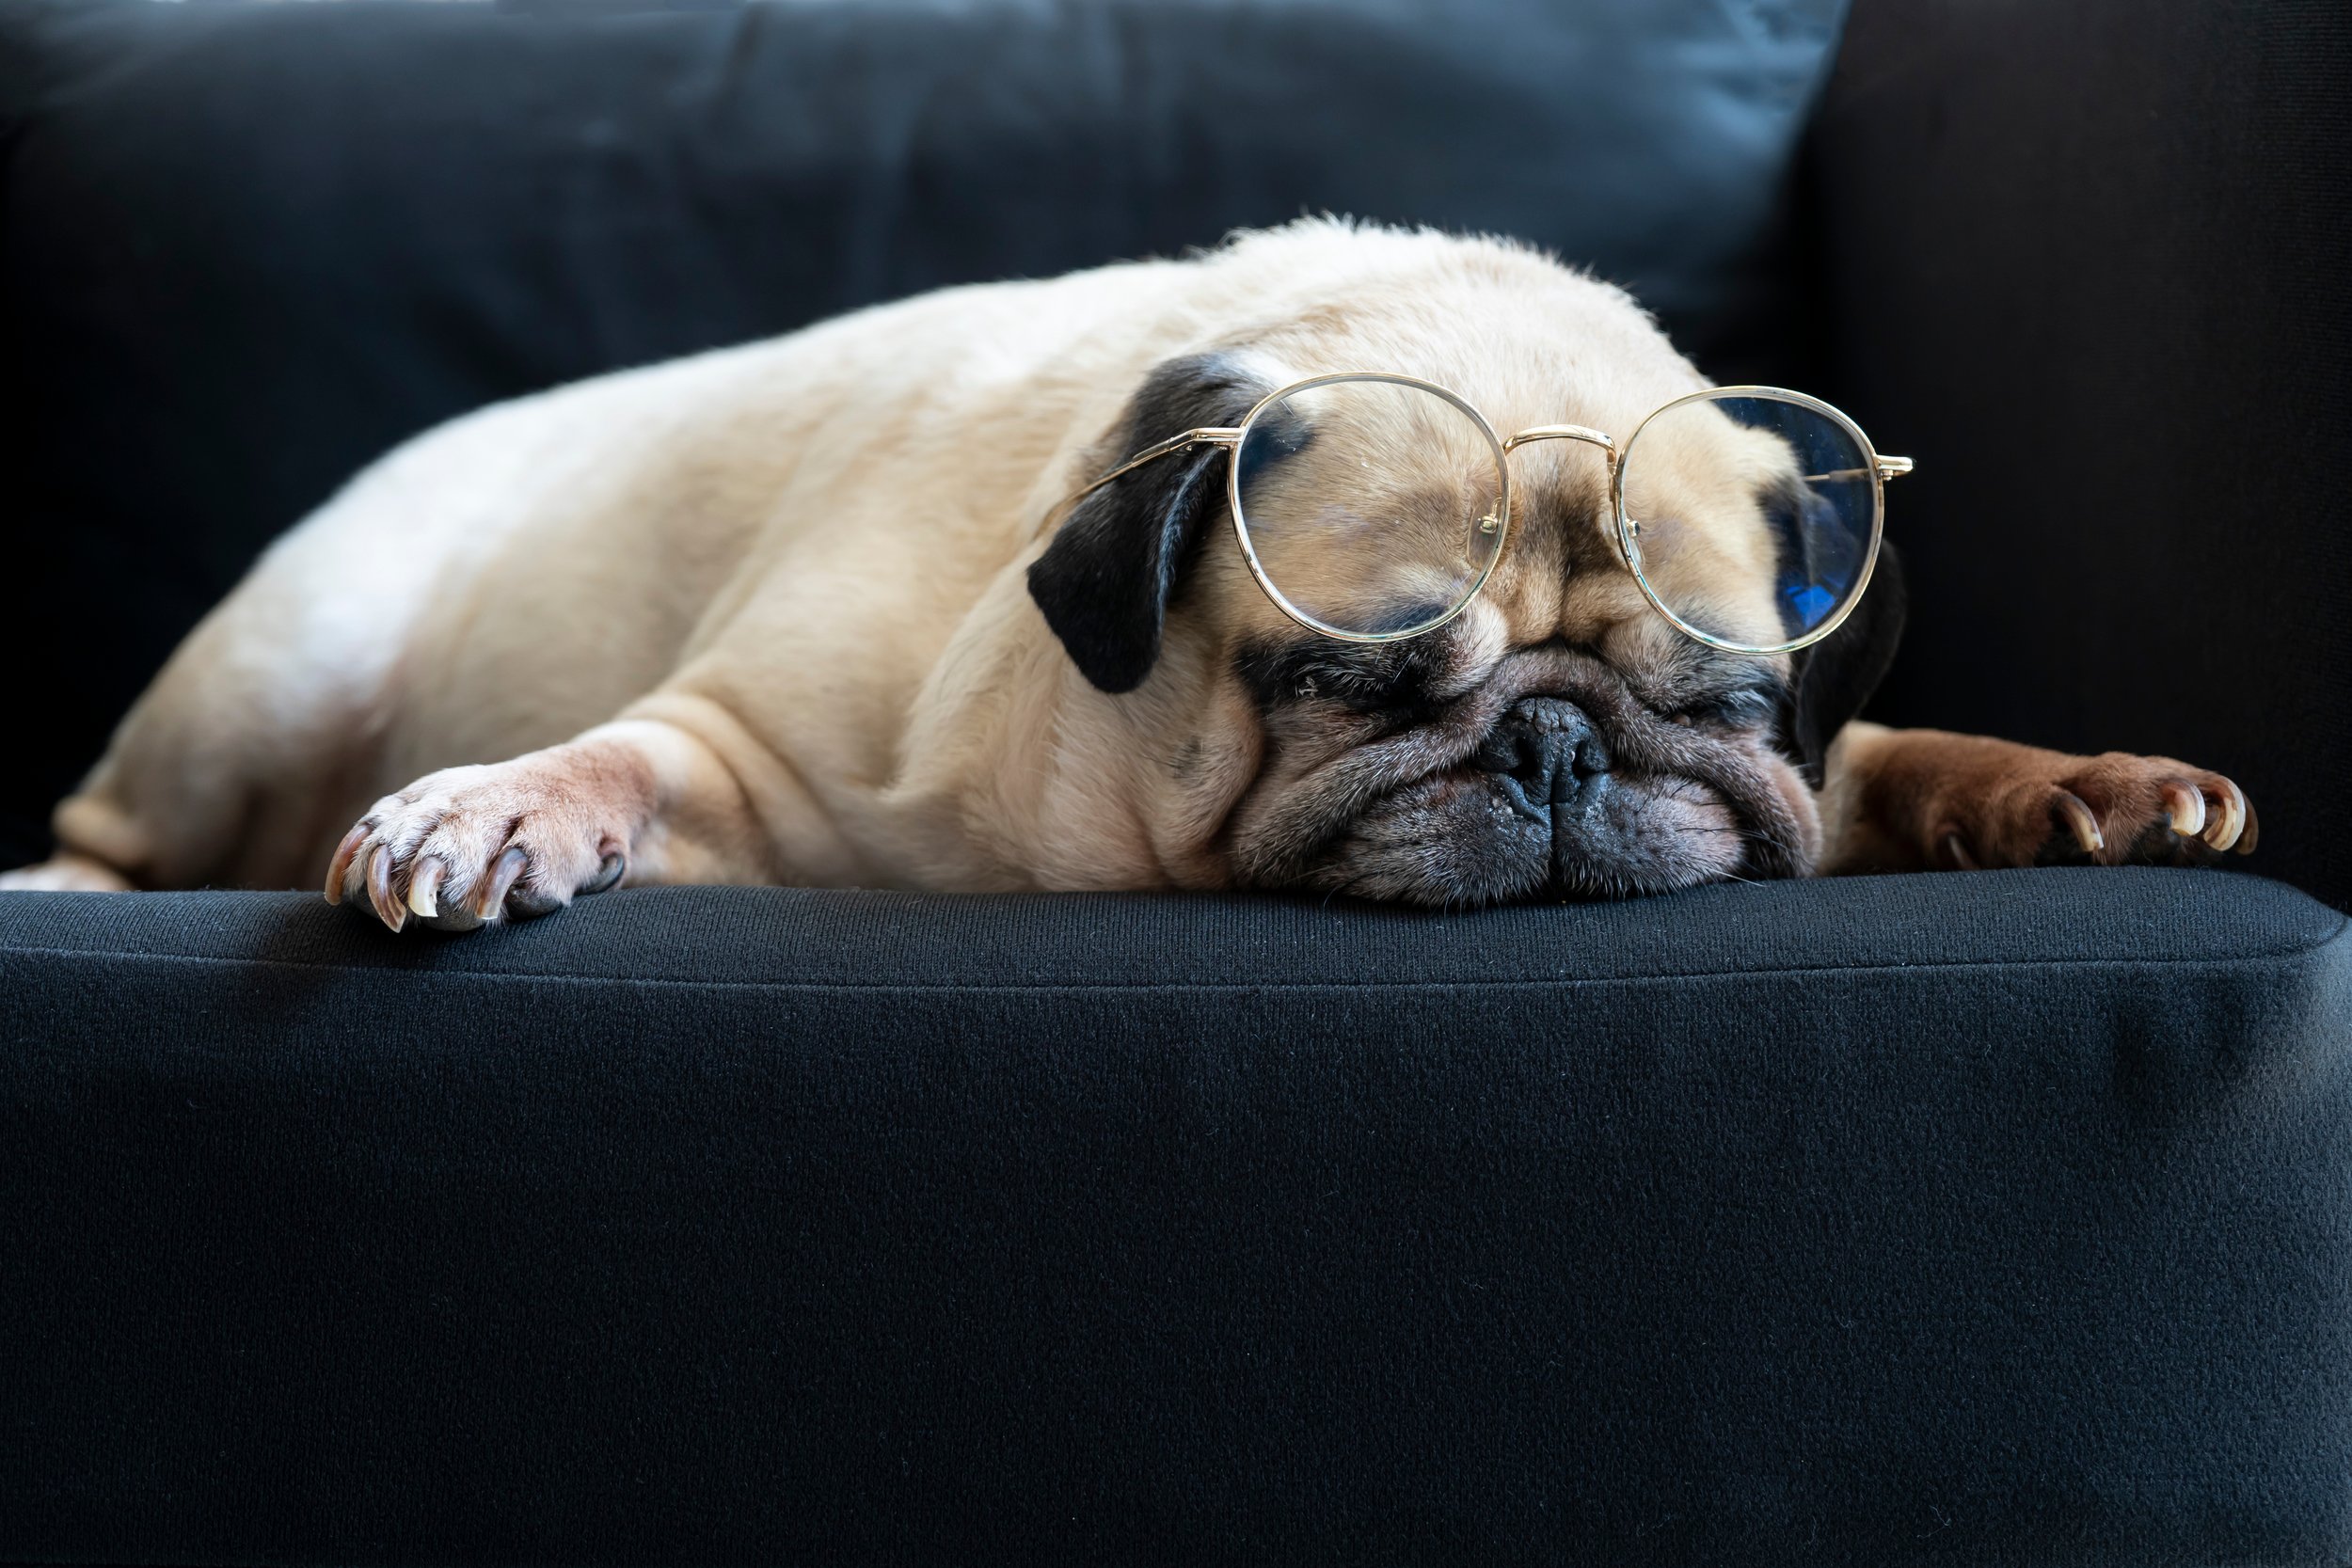 ARE THESE PUGS WITH GLASSES CUTE OR NERDY? — WEIRD WORLD